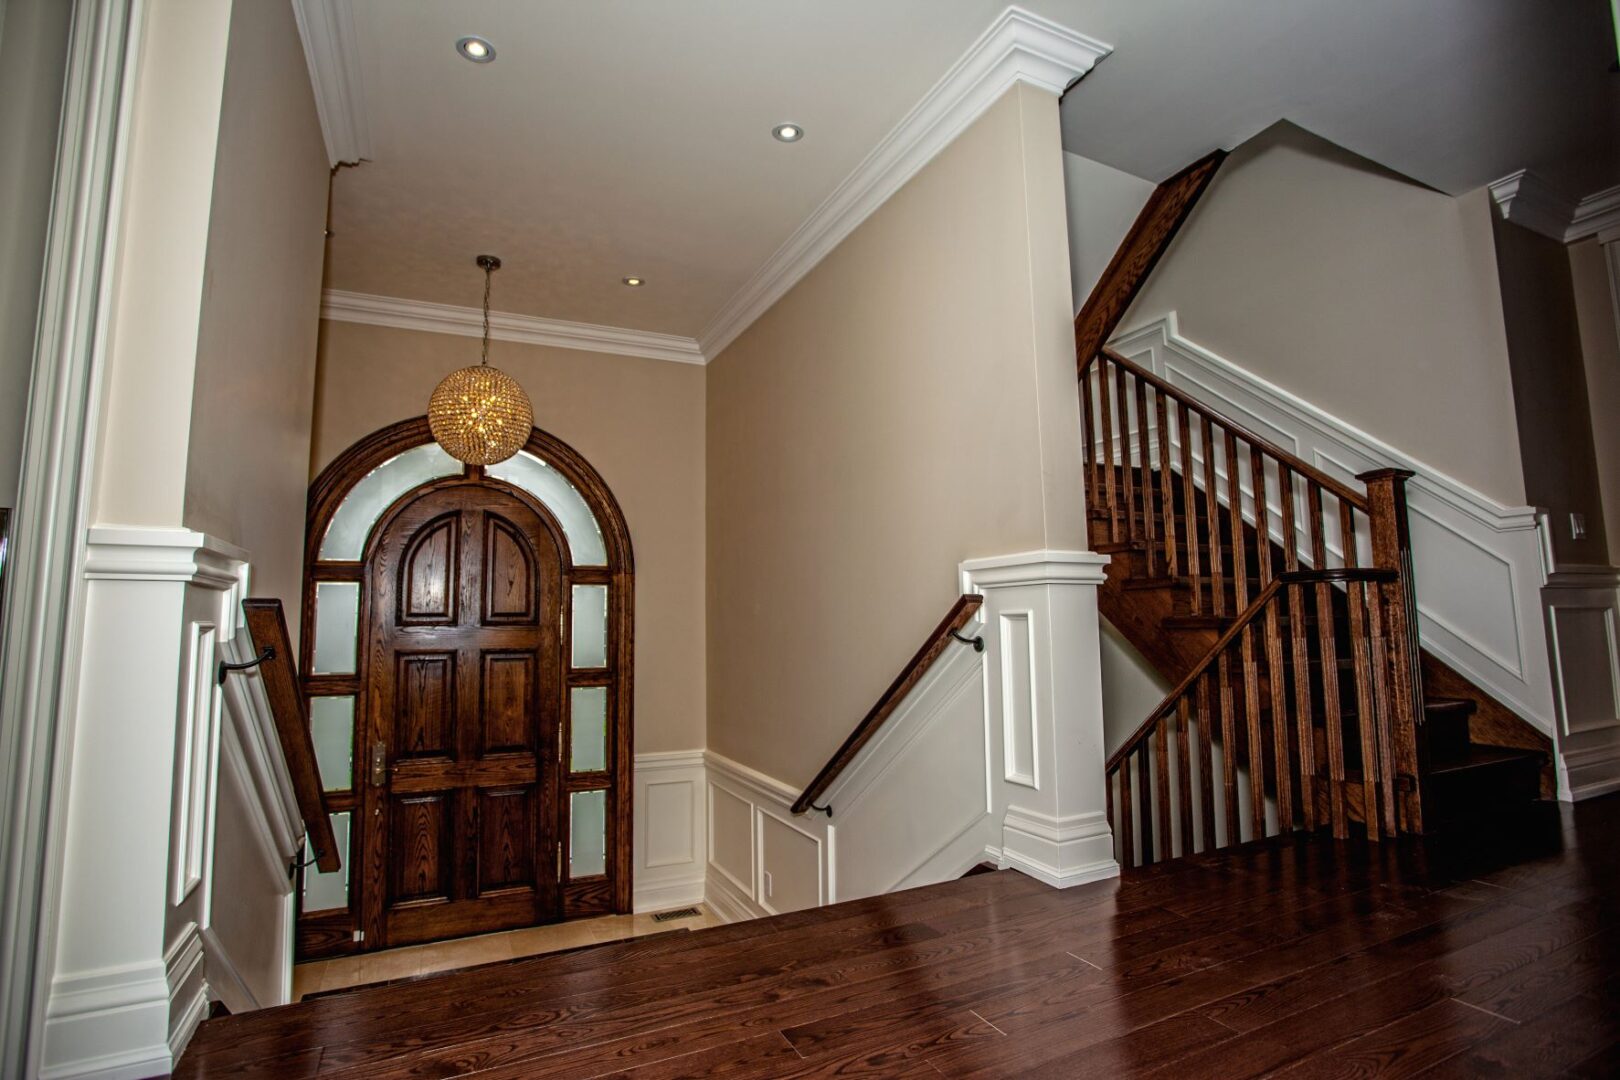 view of the downstairs to entrance door